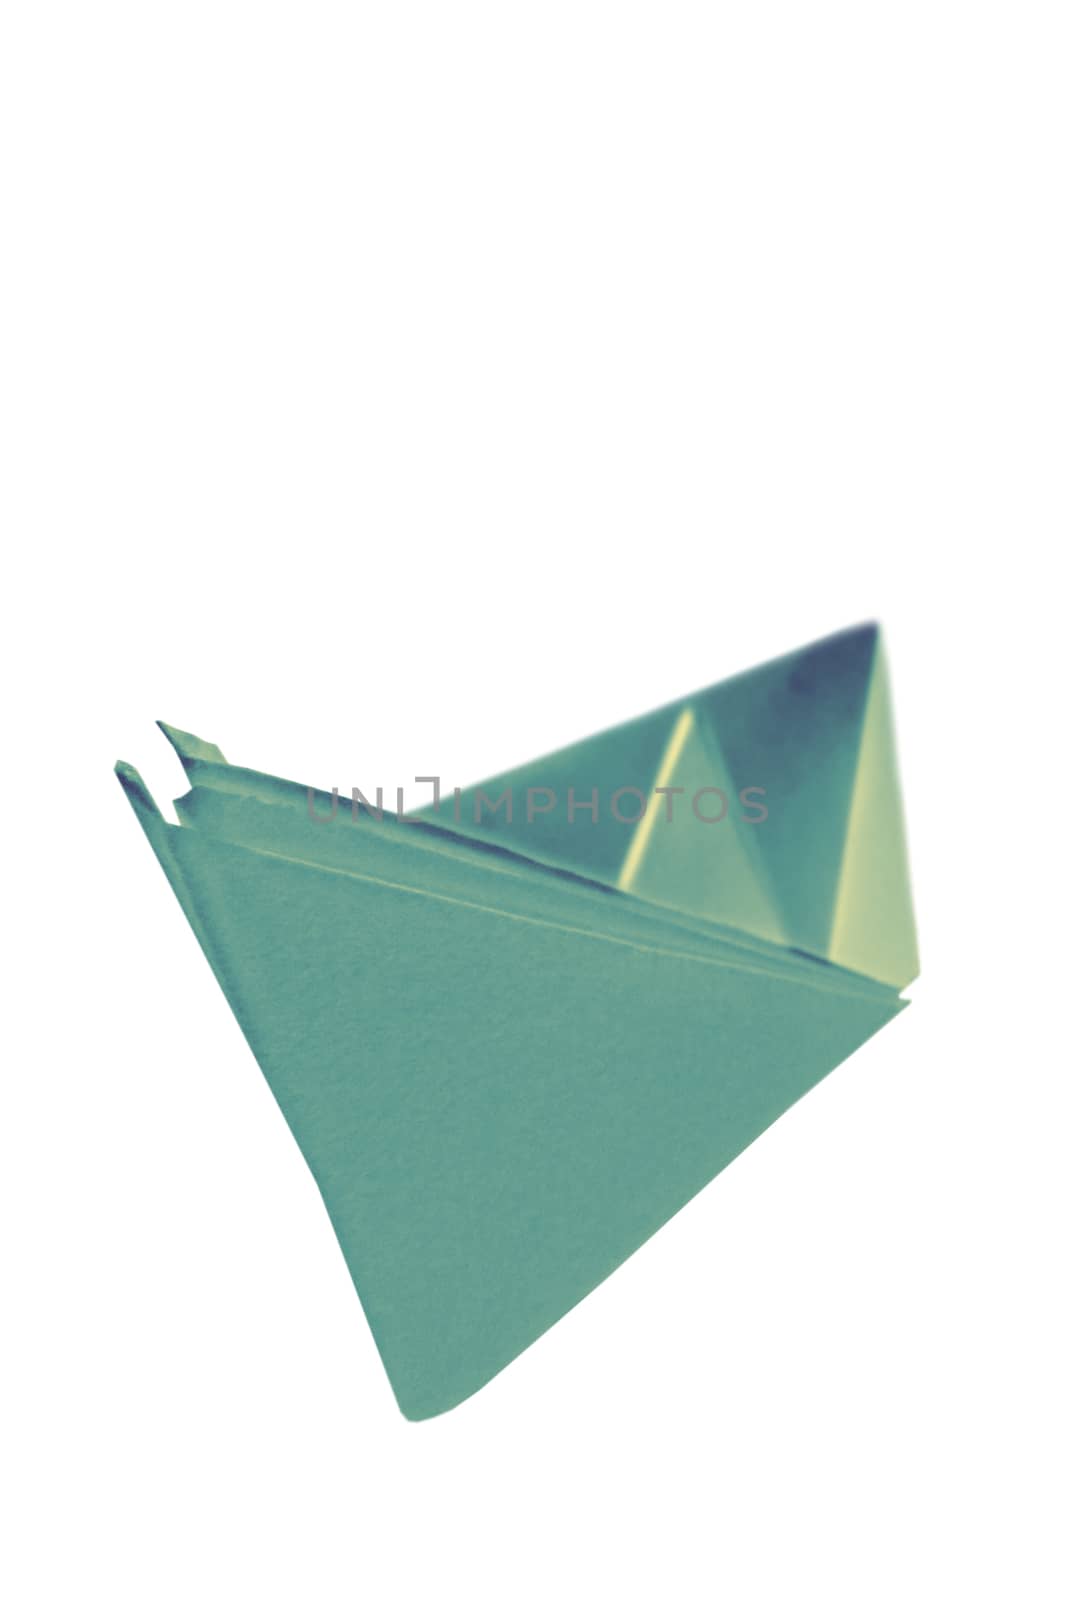 Origami Paper boat by yands